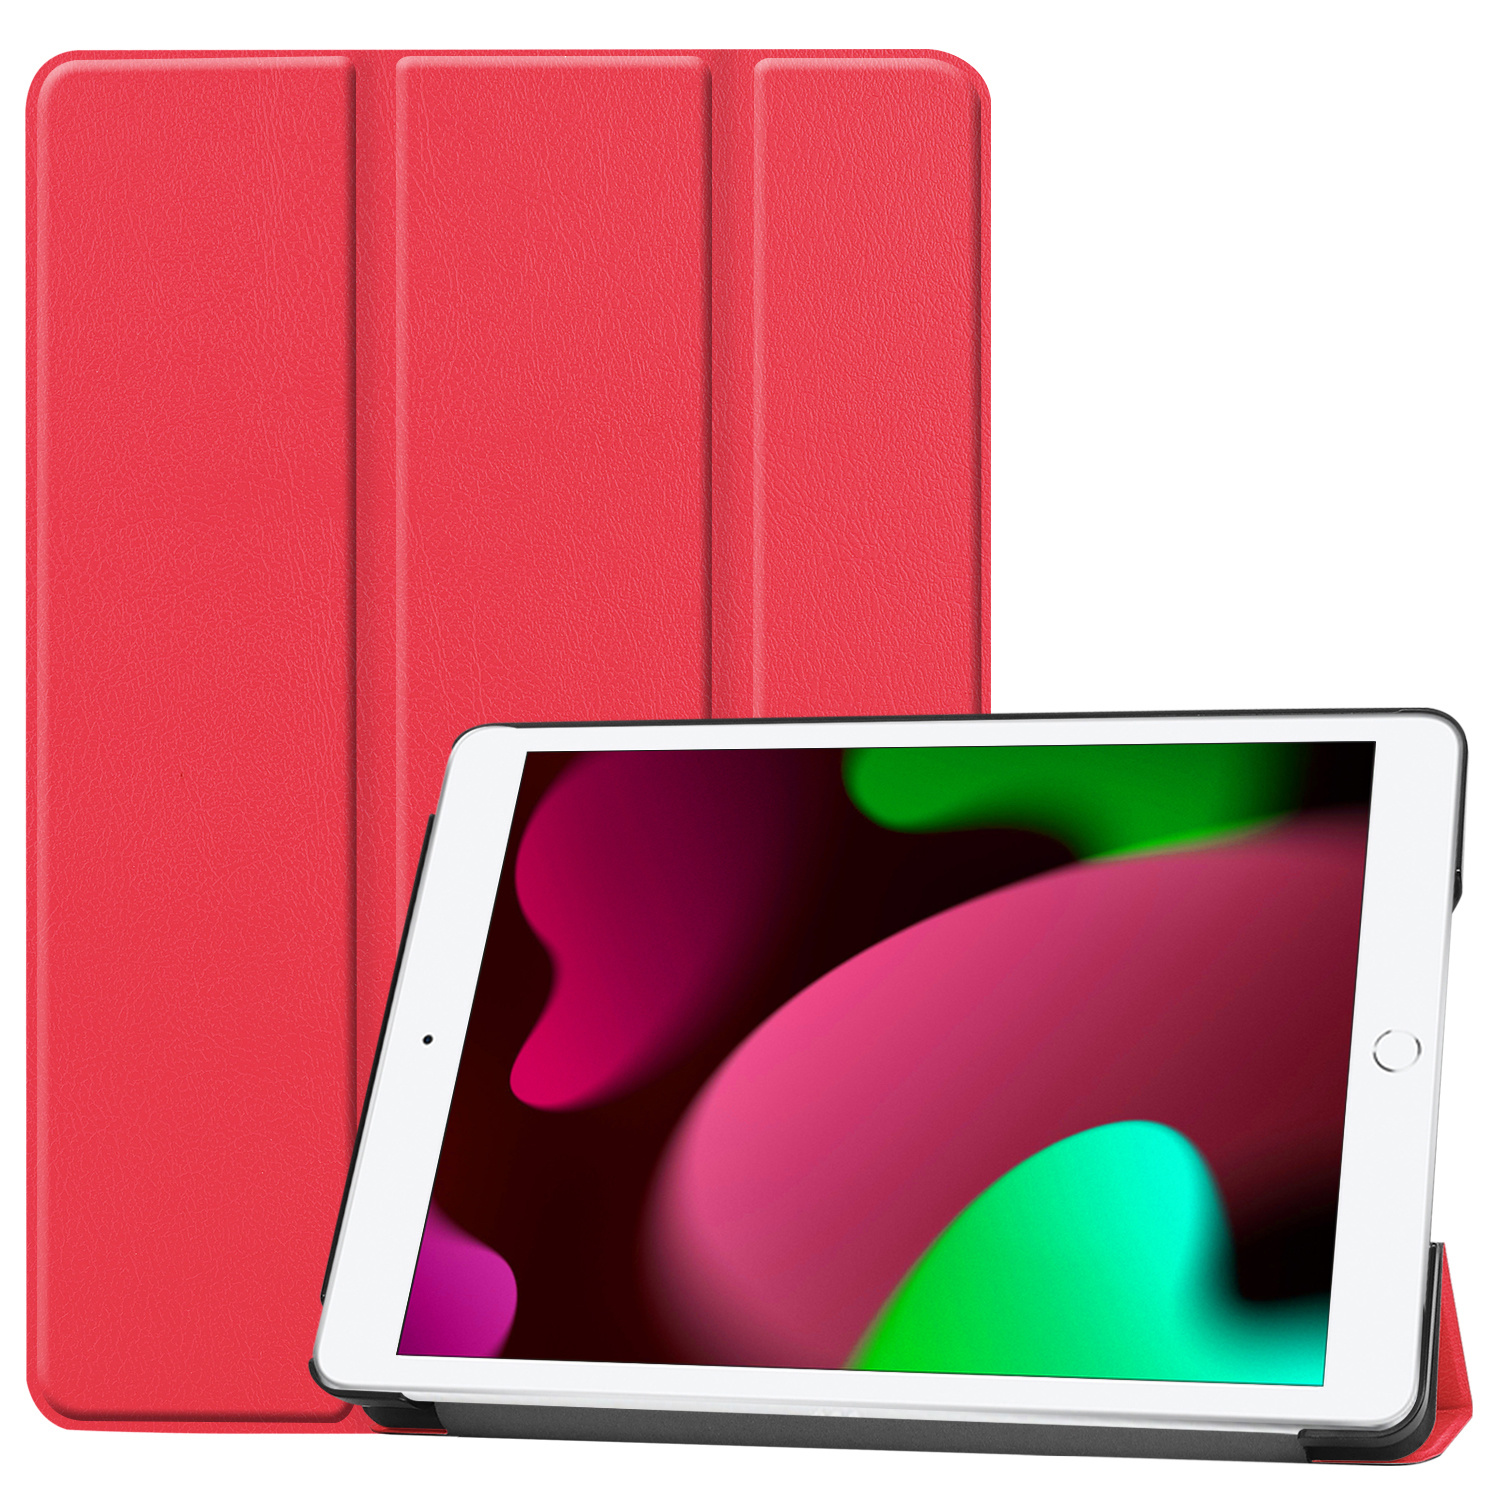 Nomfy iPad 10.2 2020 Hoesje Book Case Hoes - iPad 10.2 2020 Hoes Hardcover Case Hoesje - Rood